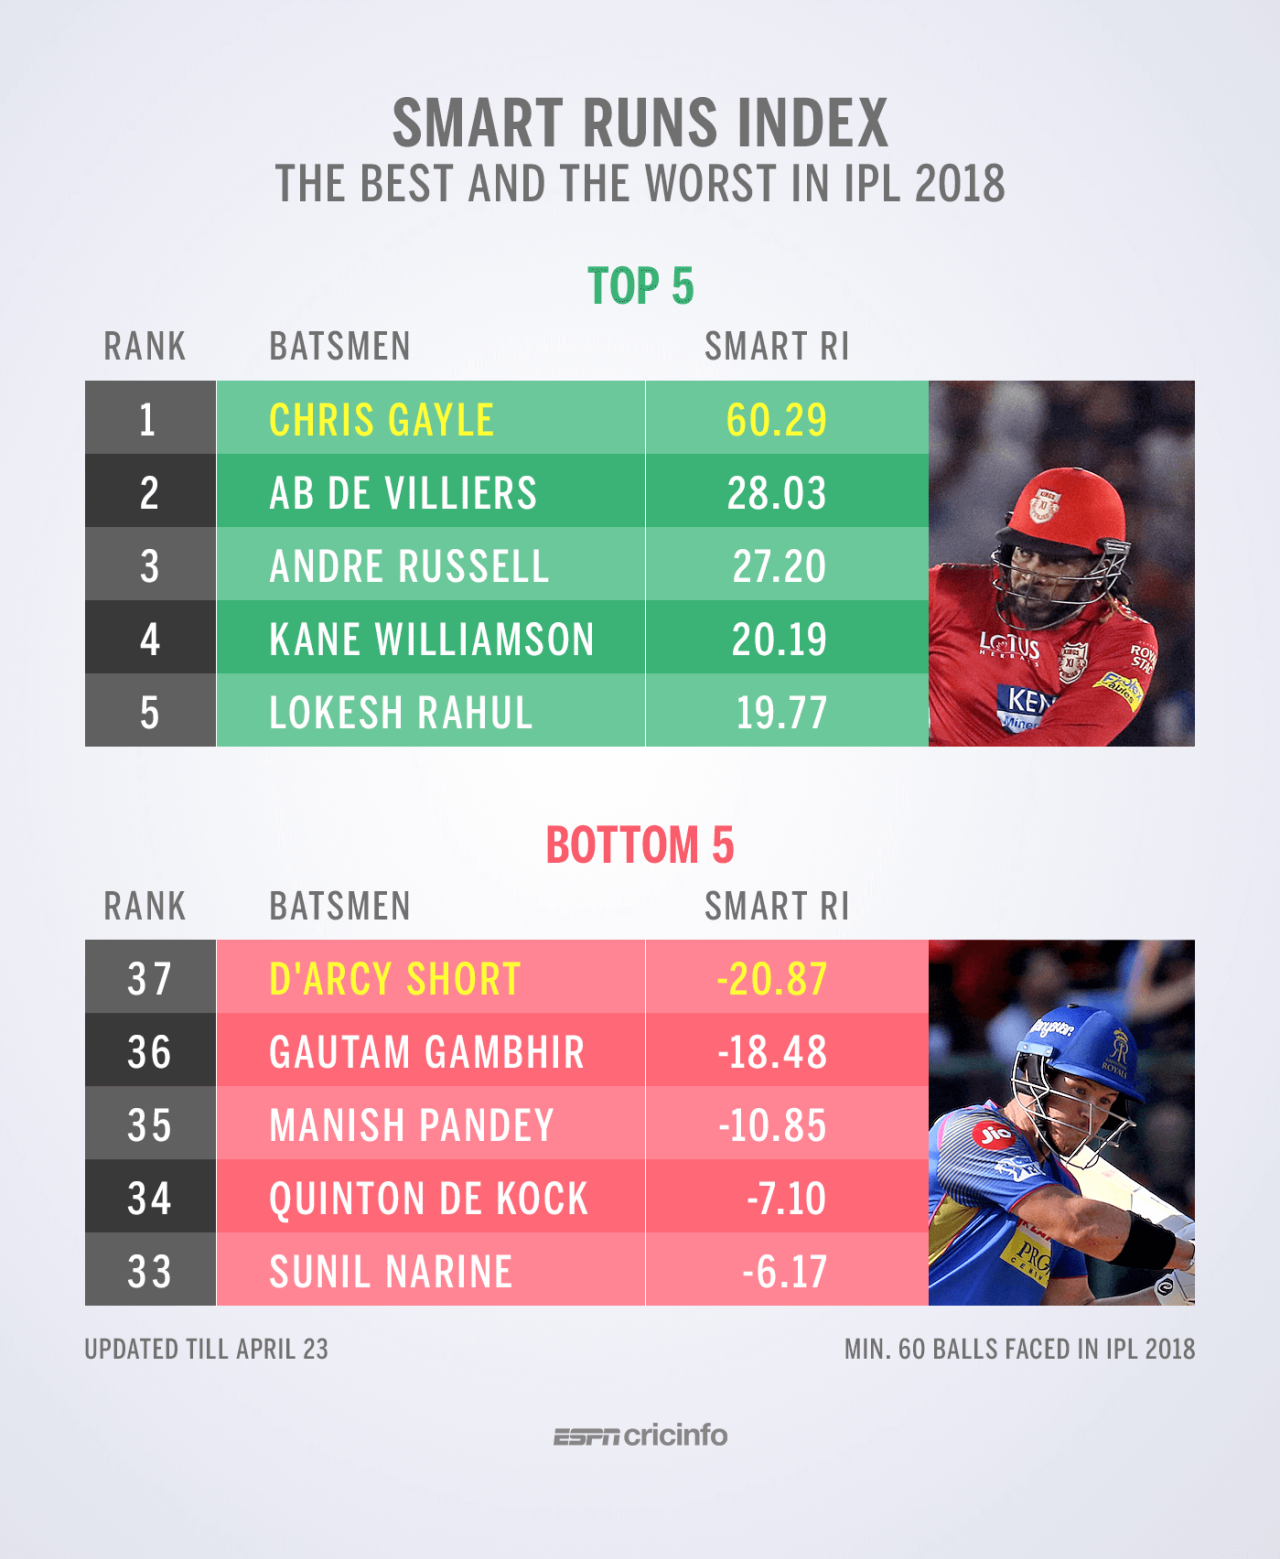 The best and worst in ESPNcricinfo's Smart Runs Index so far, April 23, 2018